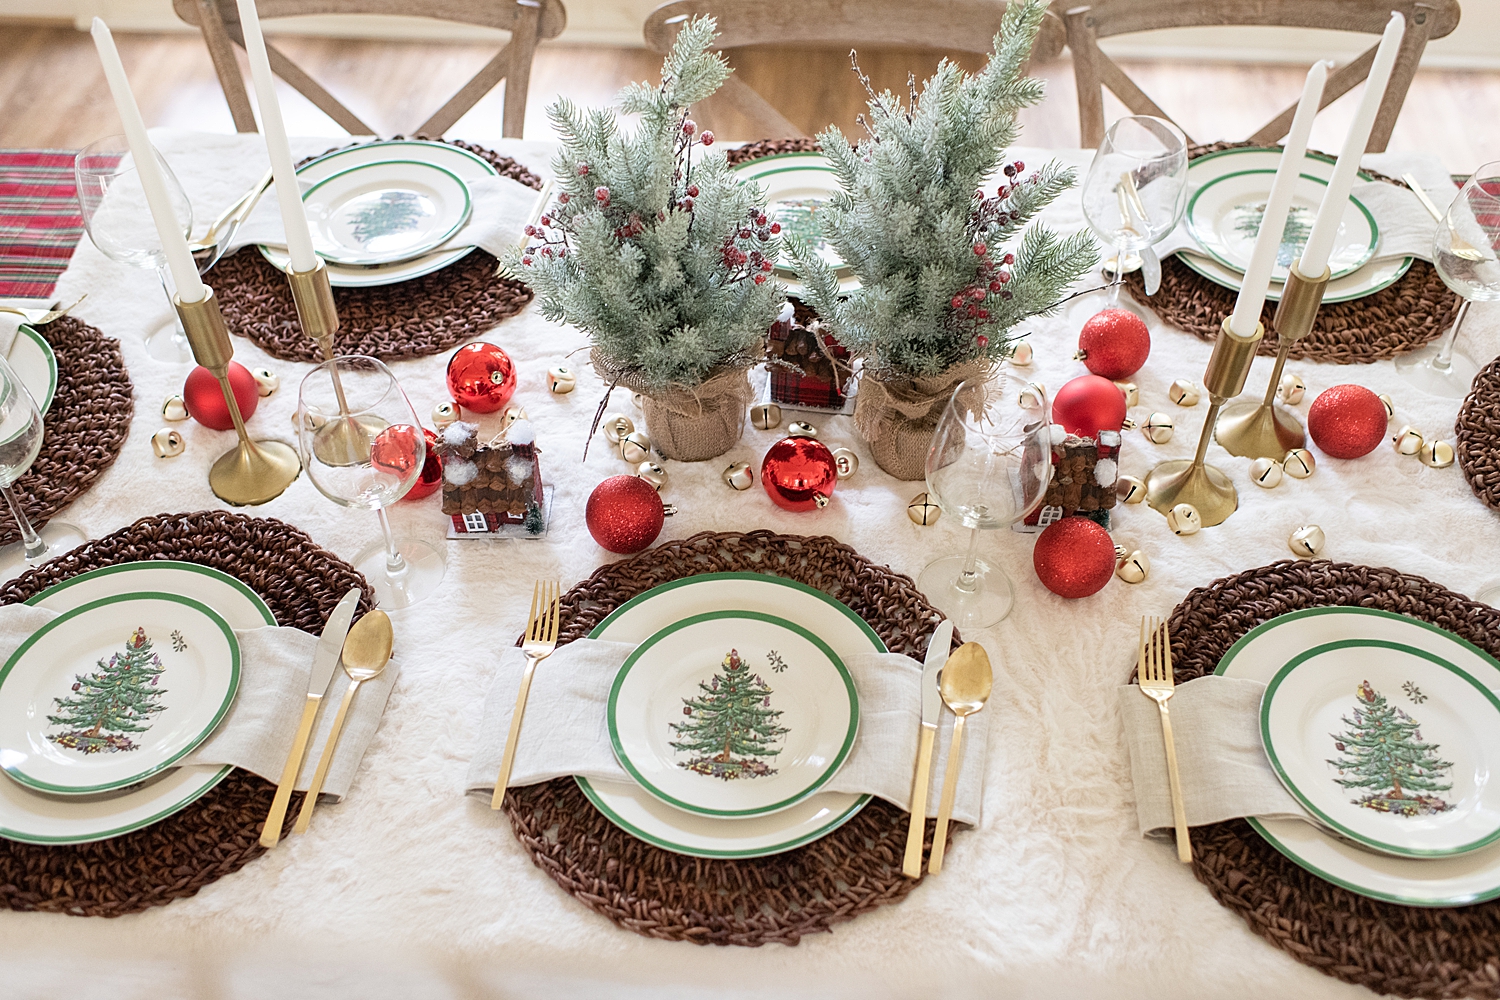 43 Christmas Place Setting Ideas In 2021 | Christmas